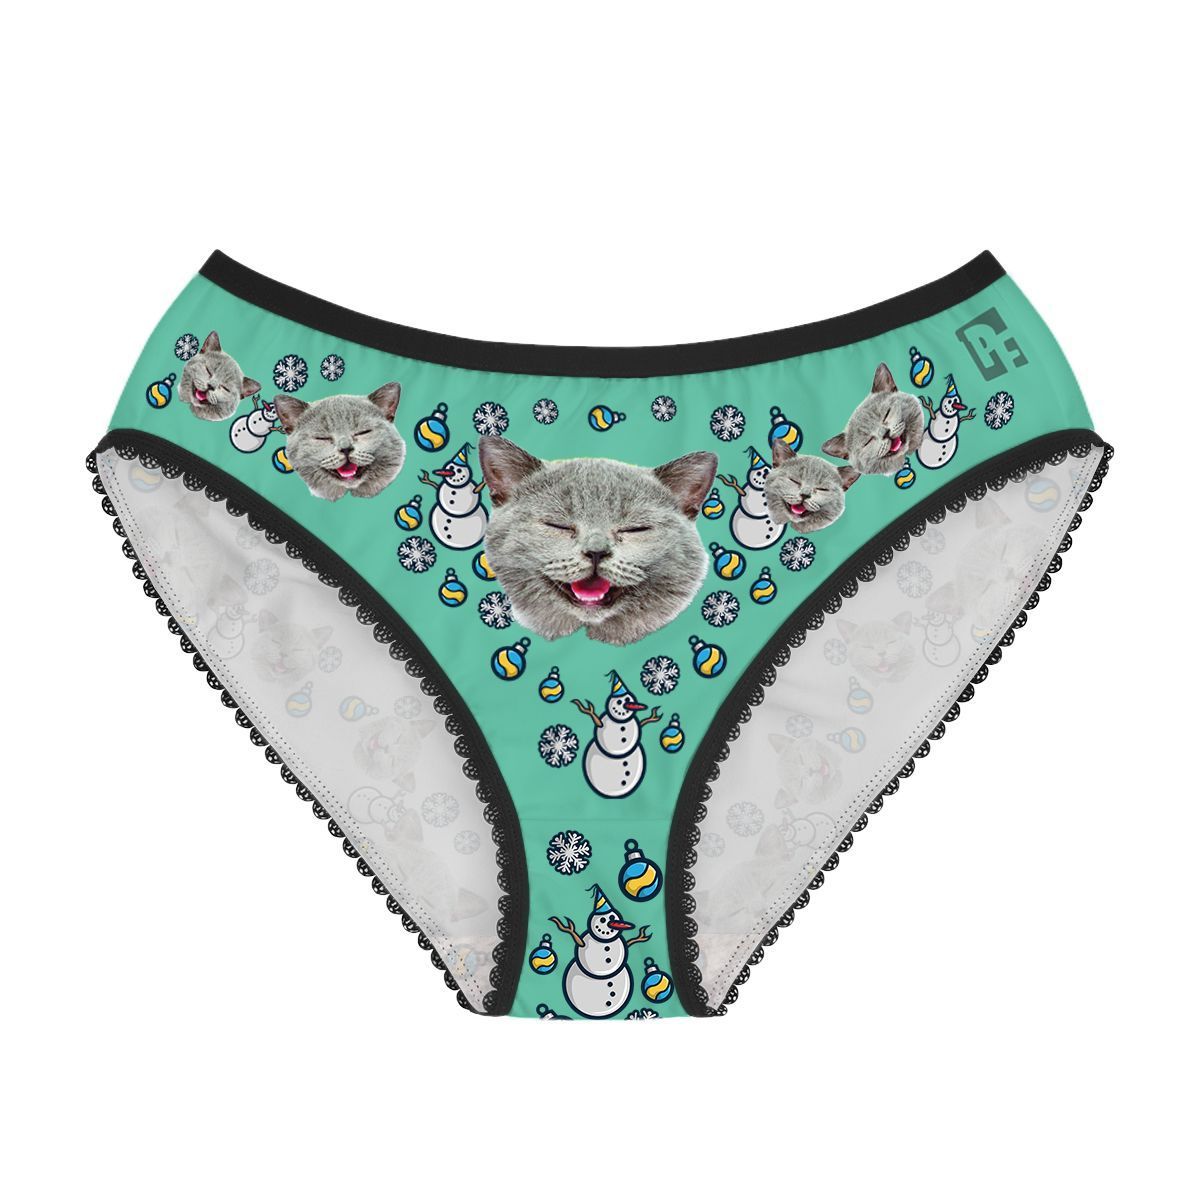 Mint Snowman women's underwear briefs personalized with photo printed on them